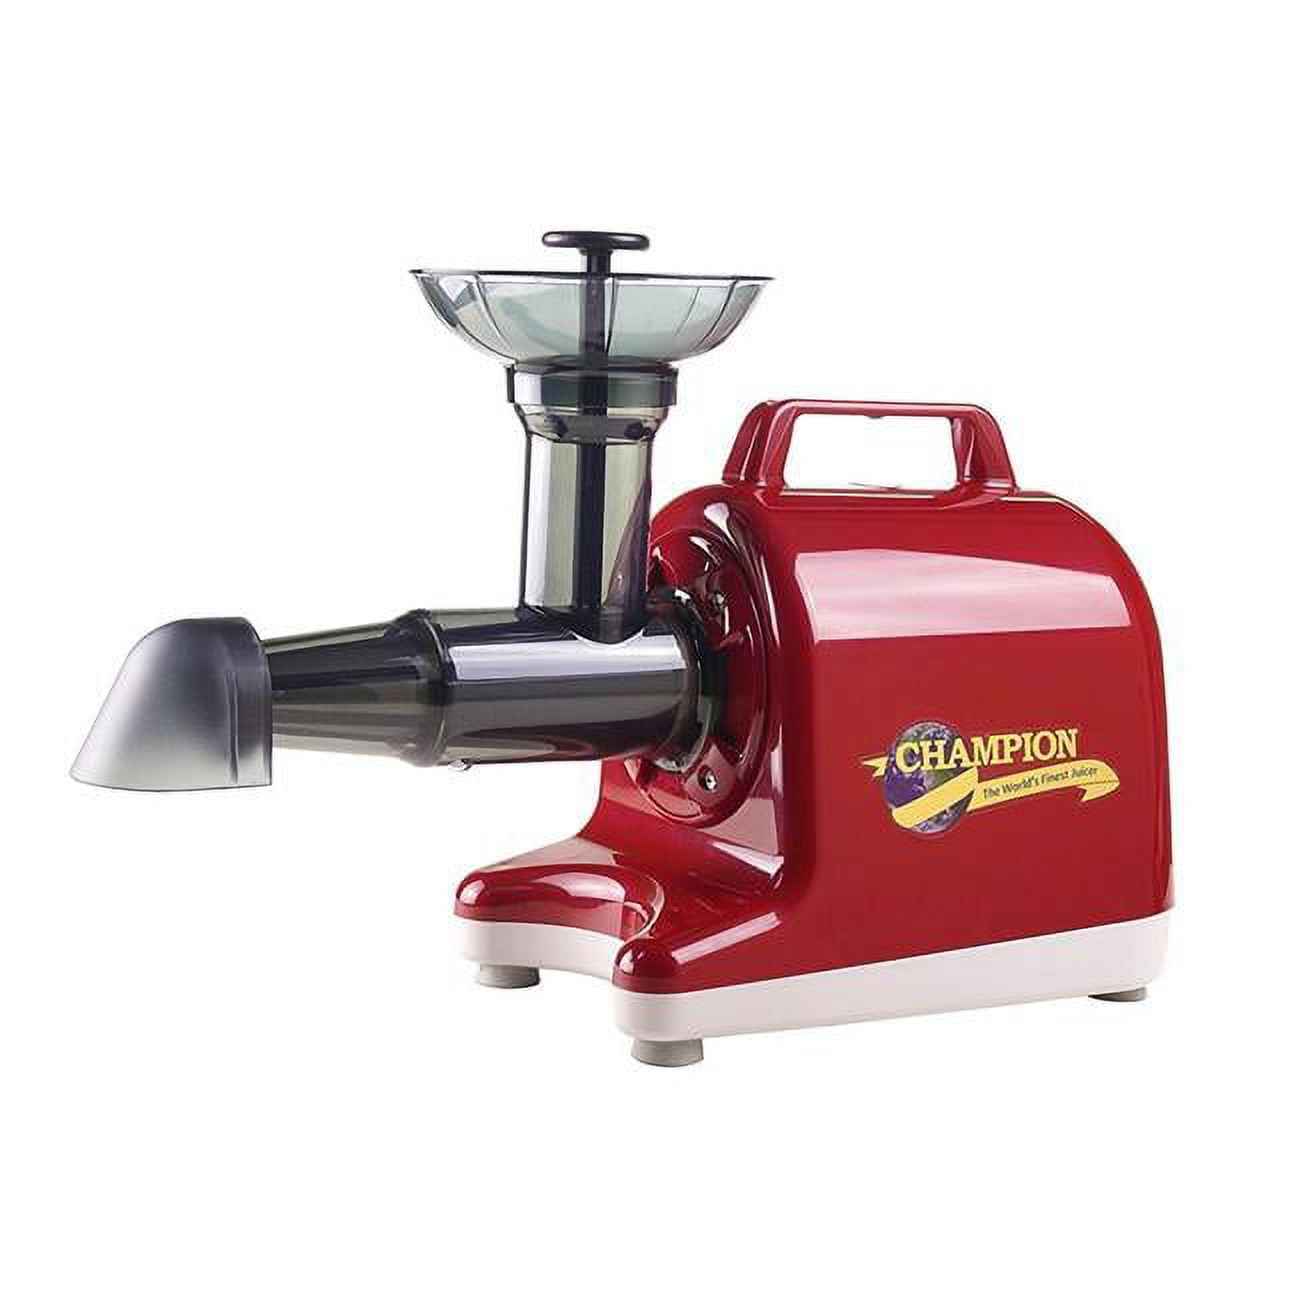 Champion 701842414412 Household 4000 Masticating Juicer - Red 